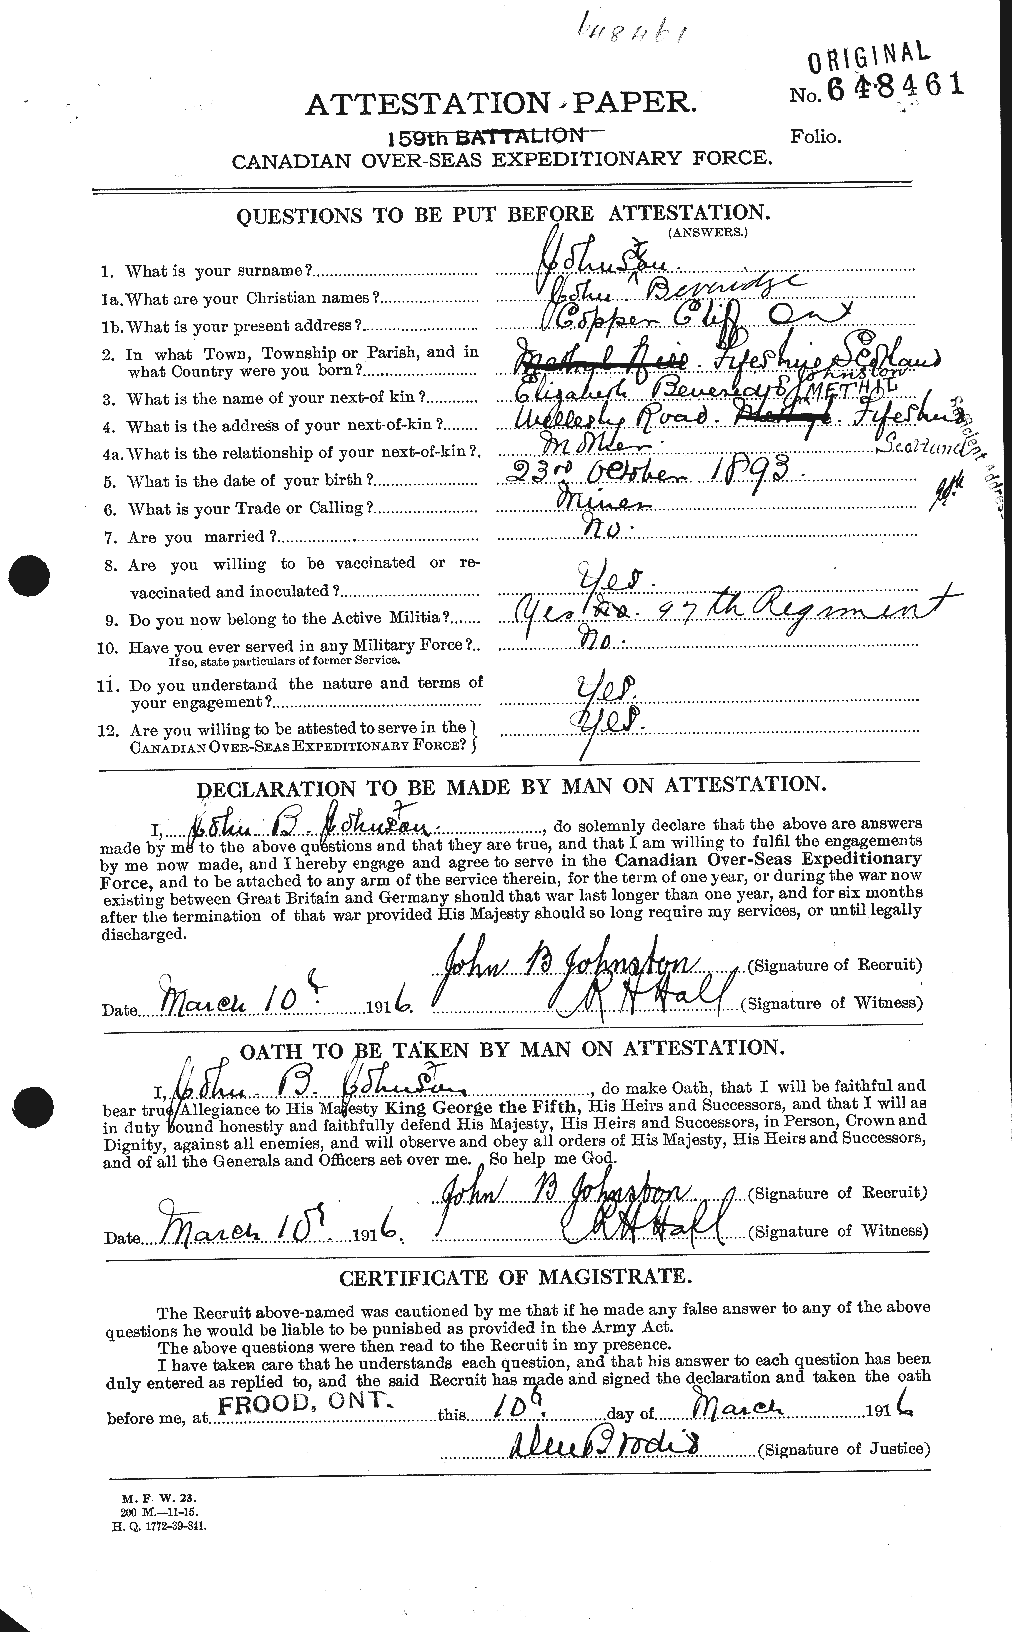 Personnel Records of the First World War - CEF 422819a